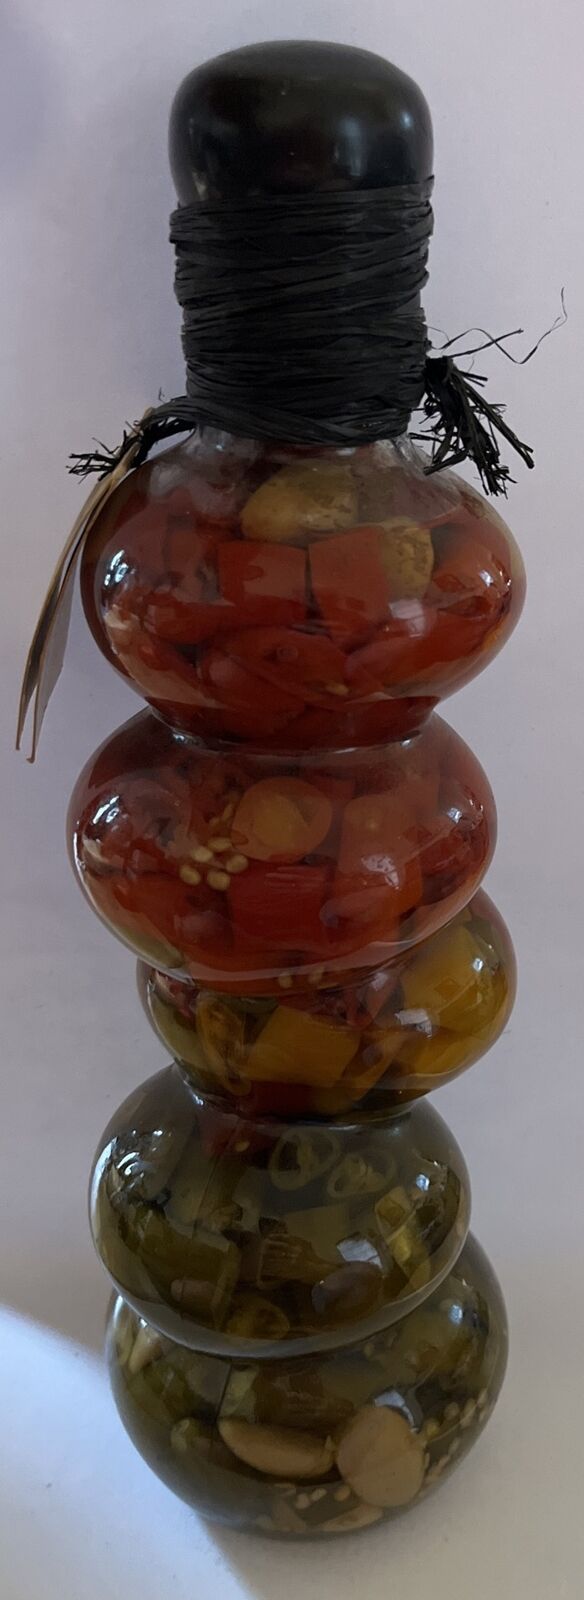 New Art For the Table Garlic & Chili Vinegar Sealed Glass Bottle 12” Tall Art For The Table - фотография #3